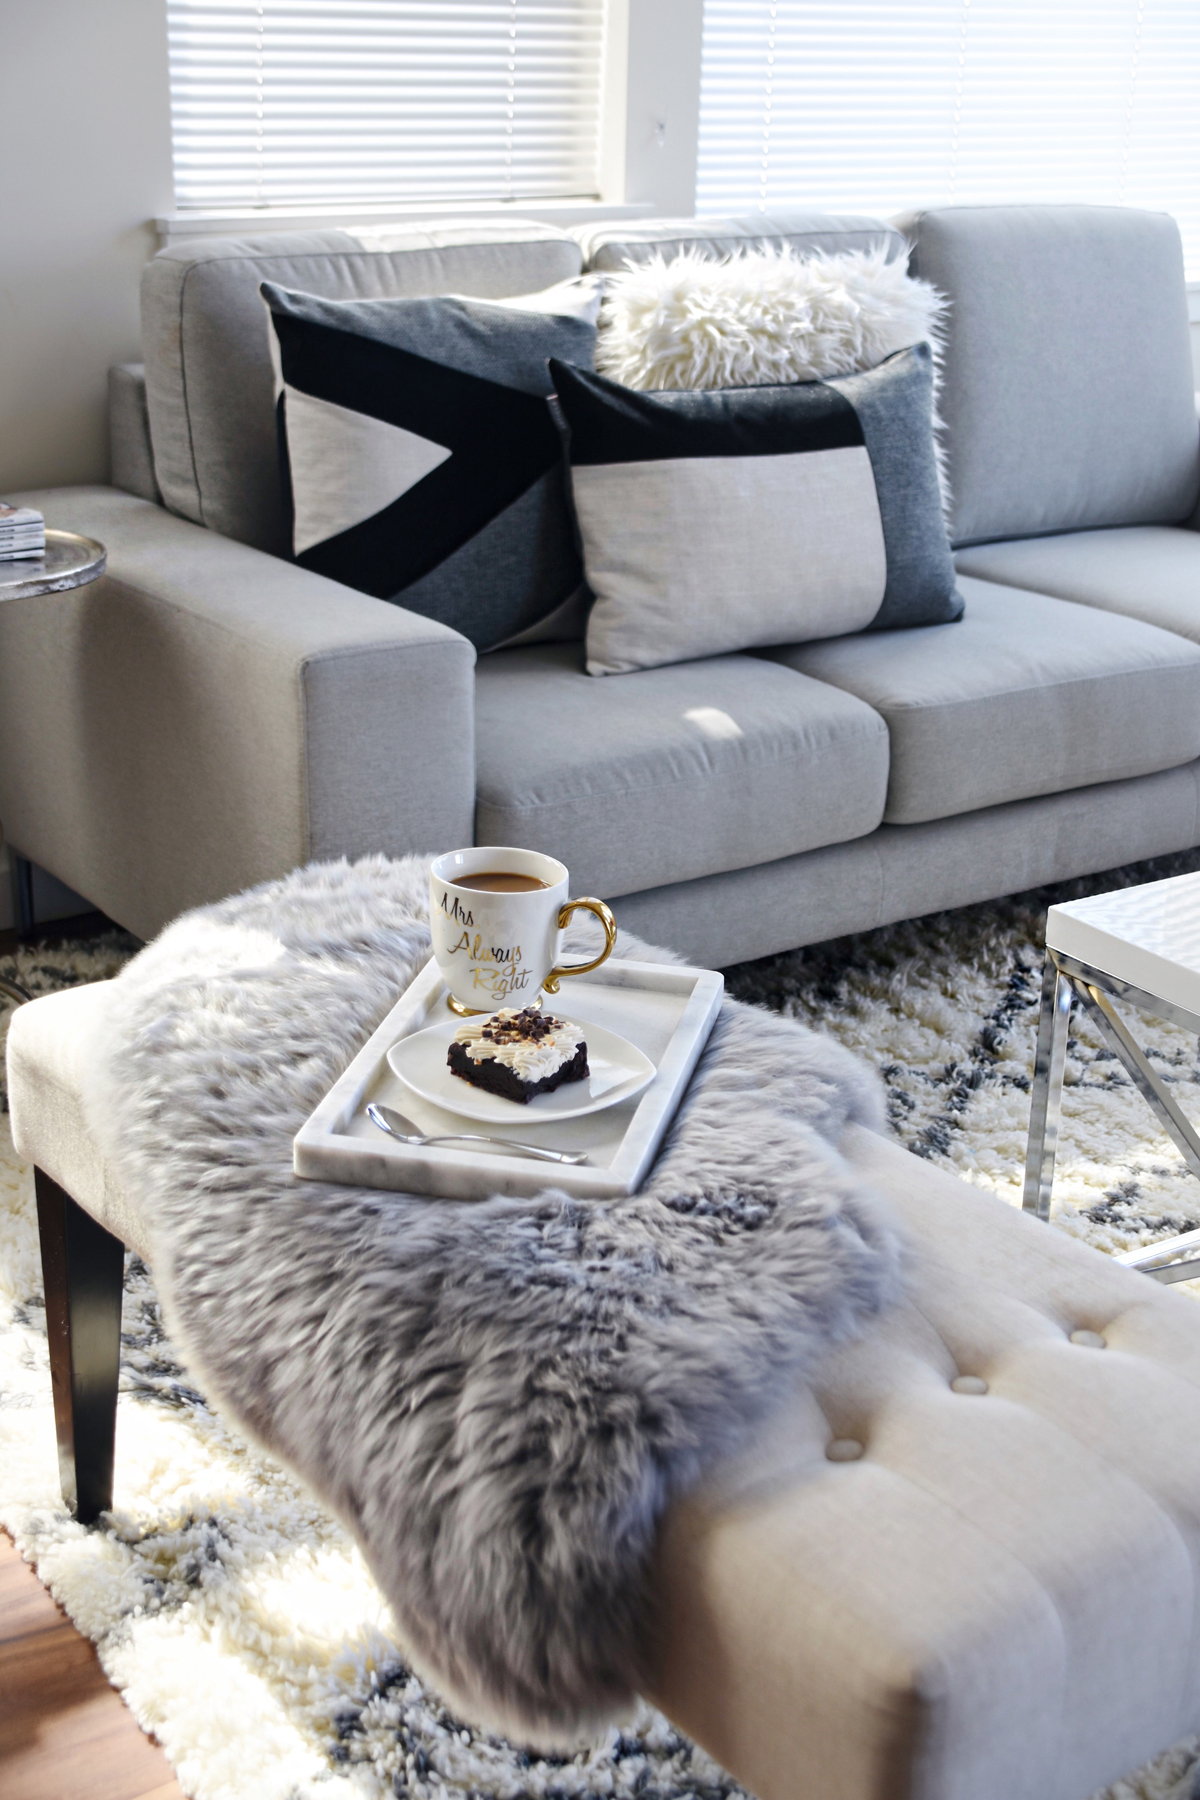 Living room decoration ideas featuring product from Article. The Taza rug, Velu pillows and Lanna throw - CONTEMPORARY HOME DECOR WITH ARTICLE by popular Denver fashion blogger Chic Talk